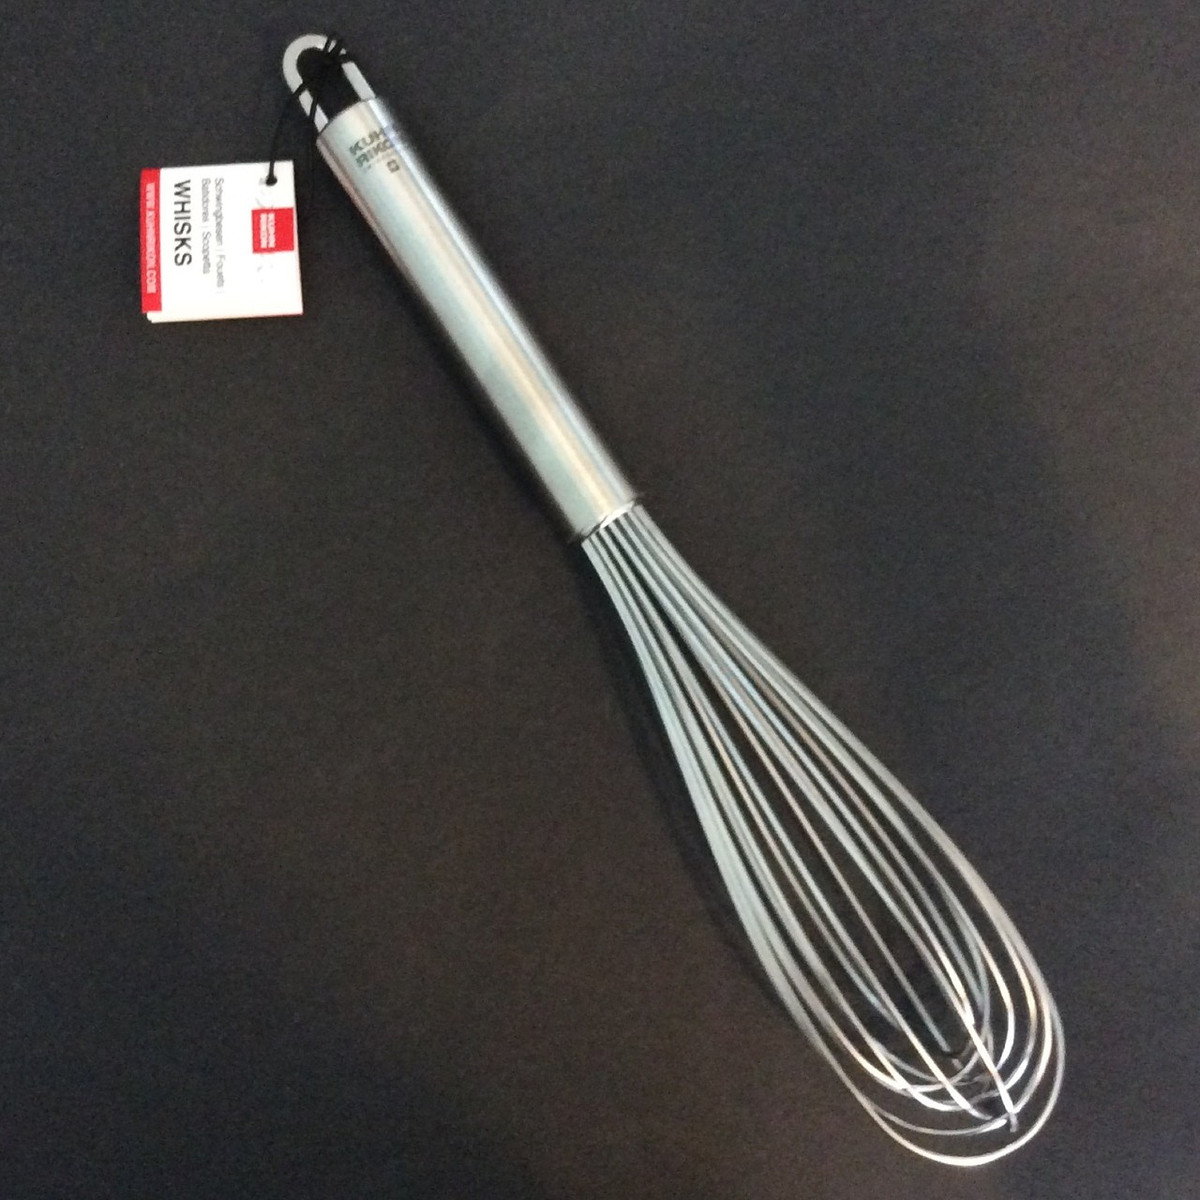 10 Ss French Whisk